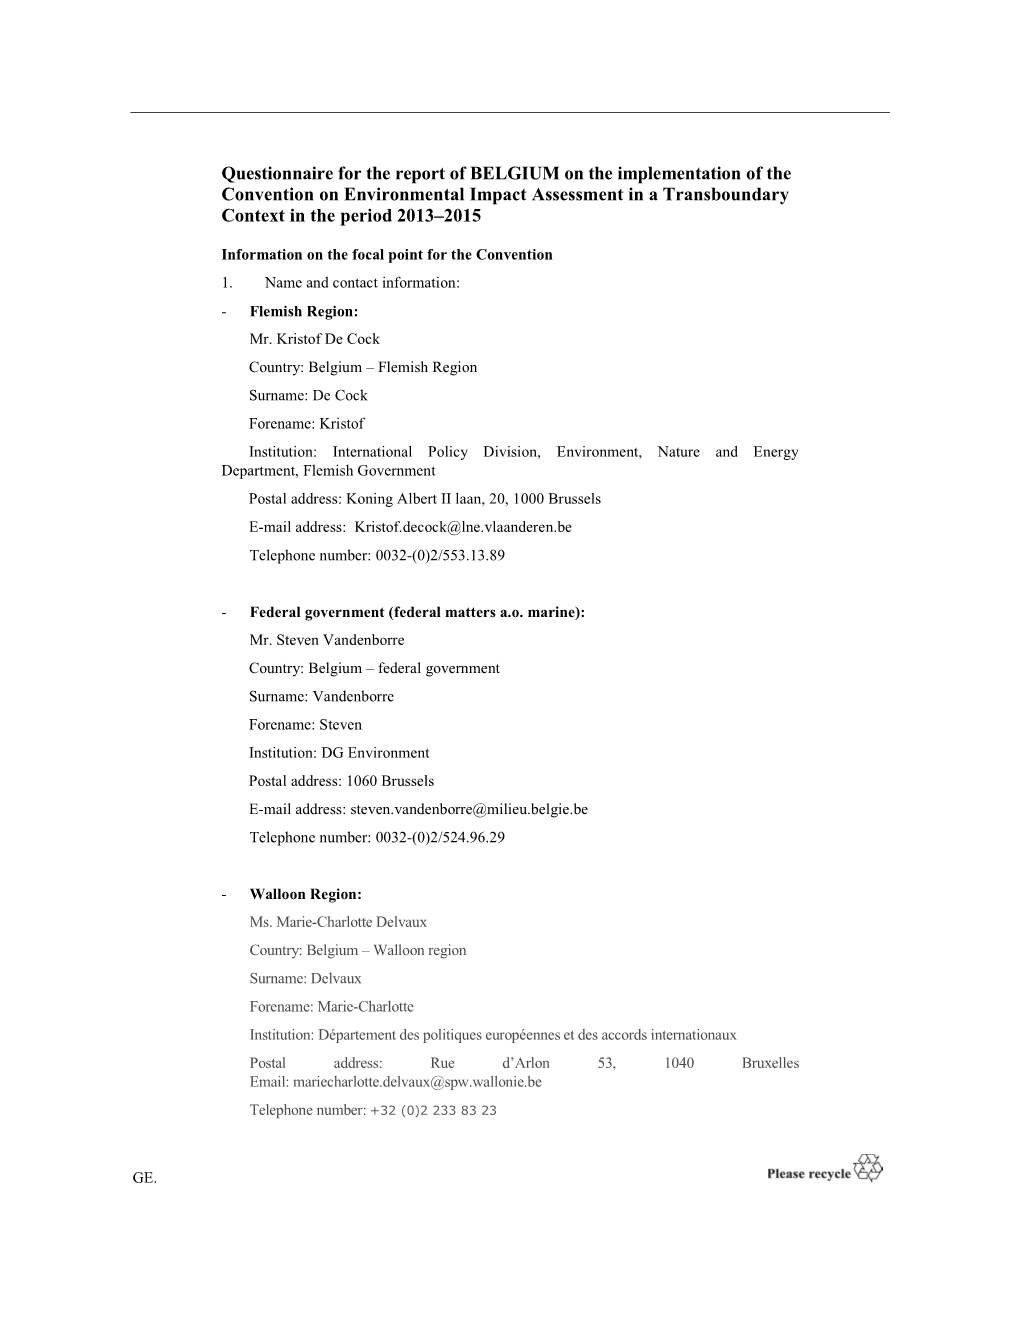 Questionnaire for the Report of BELGIUM on the Implementation of the Convention on Environmental Impact Assessment in a Transboundary Context in the Period 2013–2015